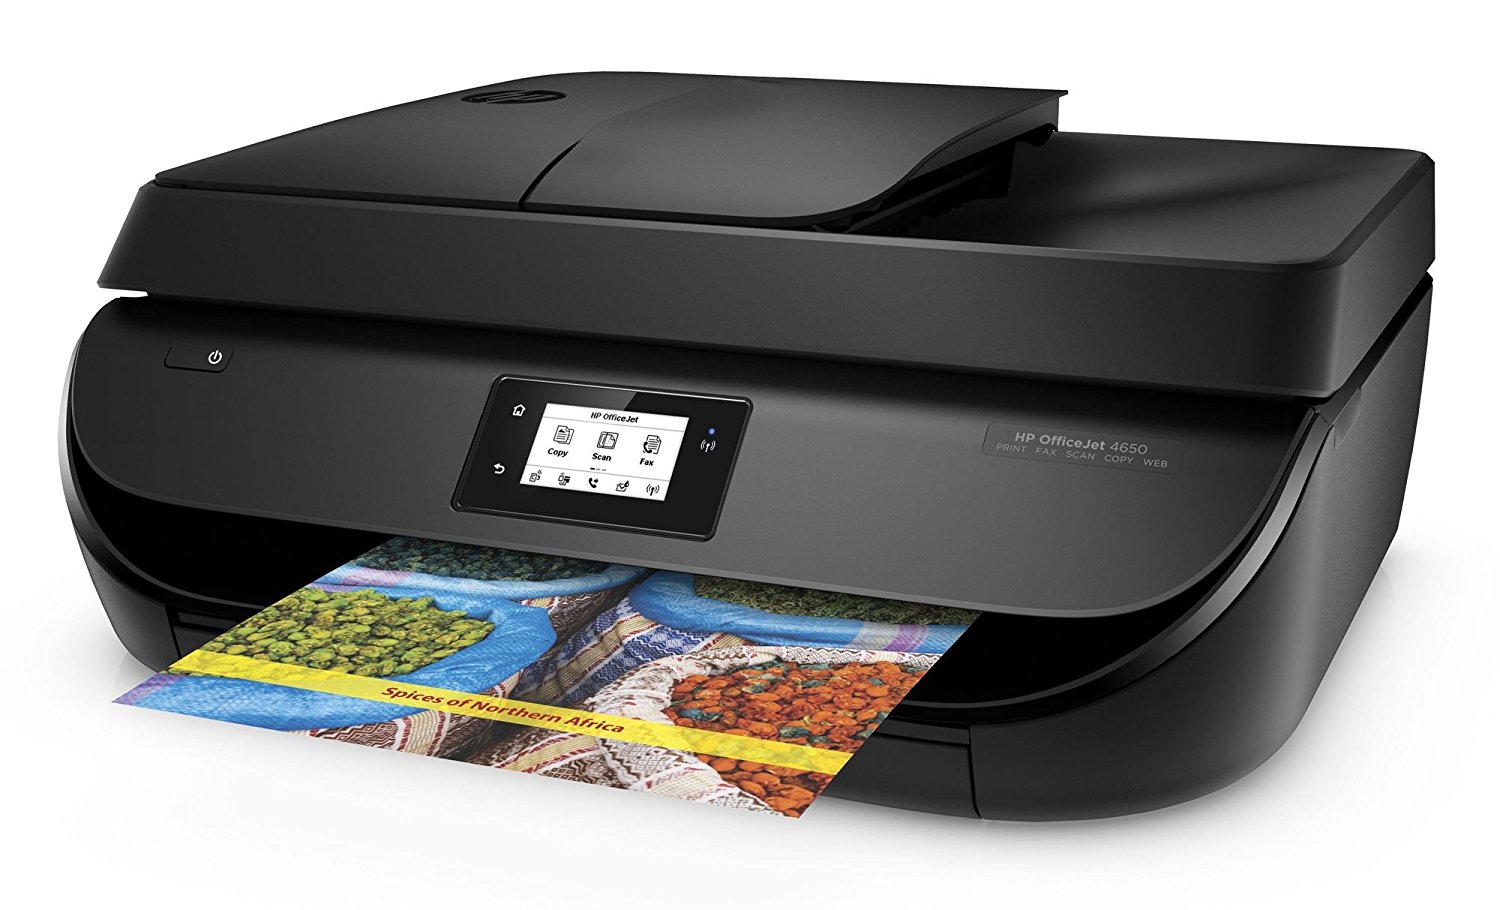 How to Install HP OfficeJet 4620/4622 Ubuntu 20.04 Focal LTS - Featured